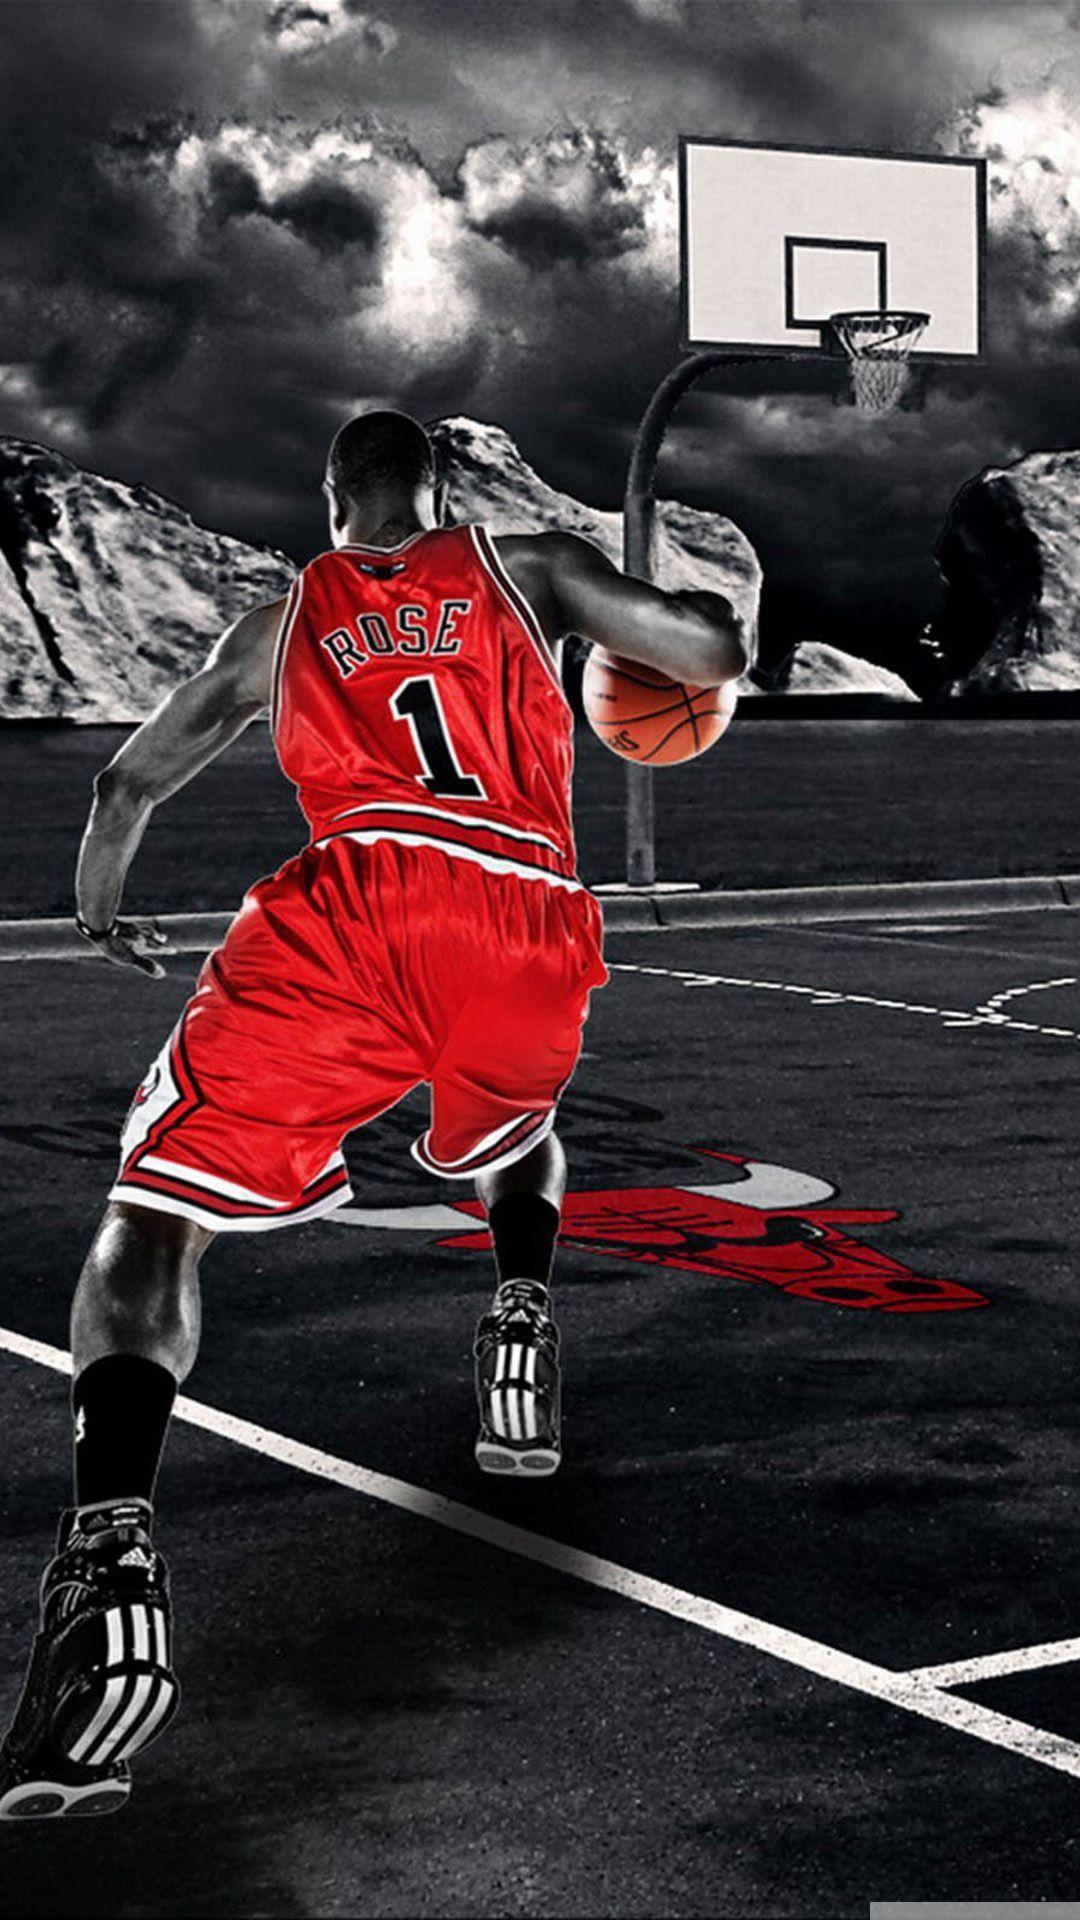 1080 x 1920 · jpeg - Cool Basketball Wallpapers for iPhone (60+ images)